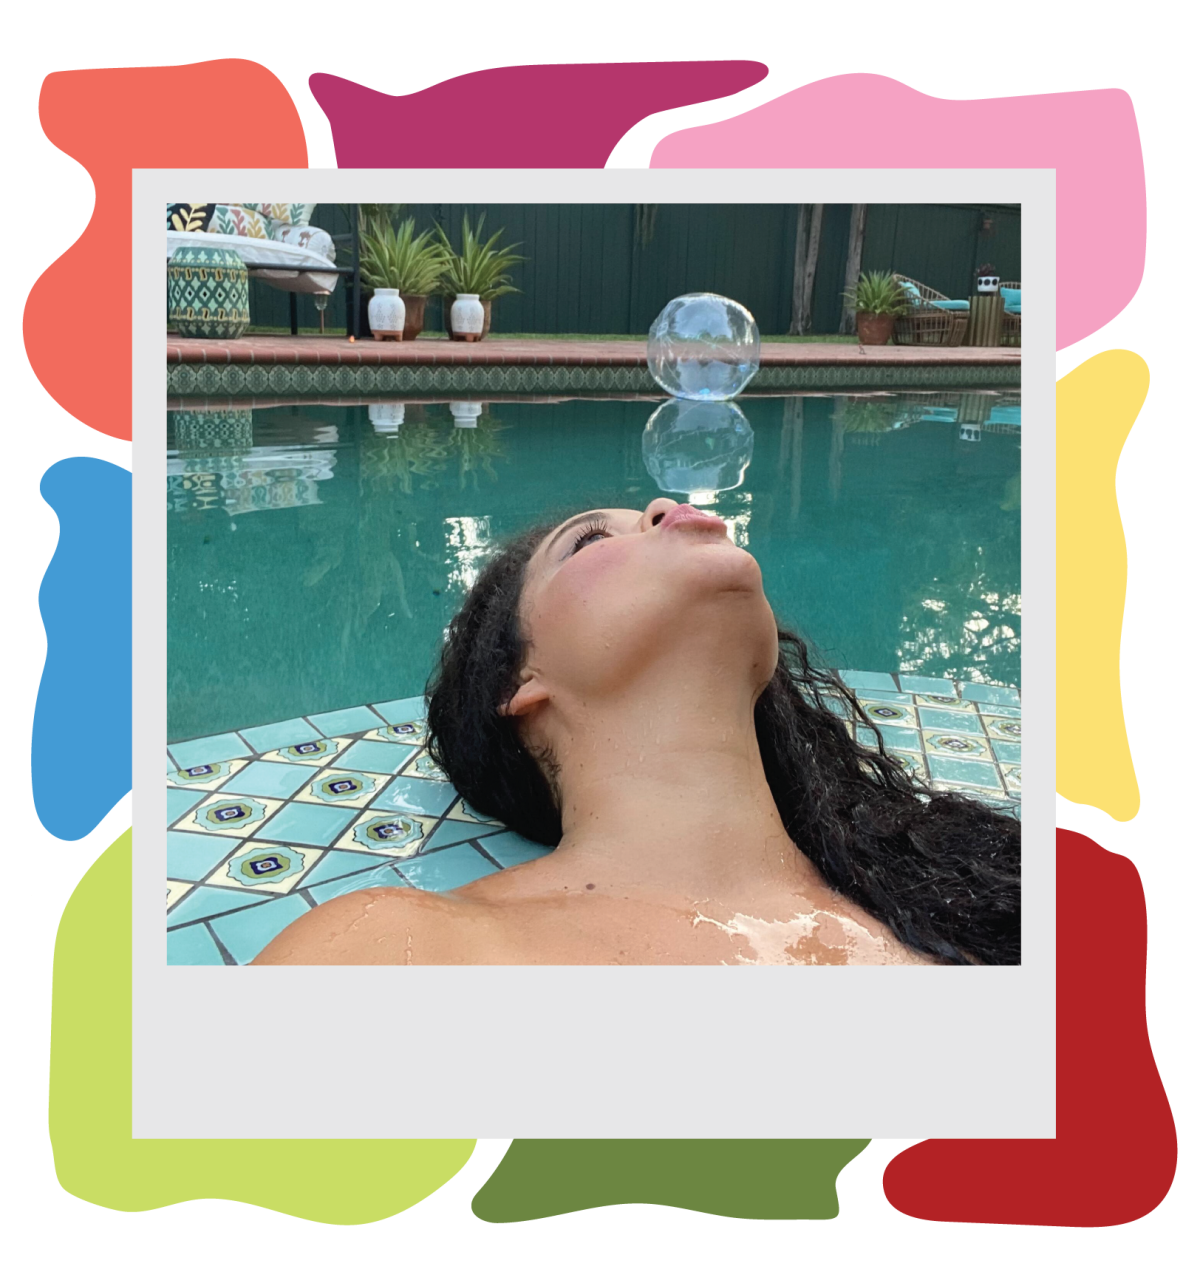 Photo illustration of a Polaroid image of a woman next to a pool with colorful shapes bordering the image from behind.